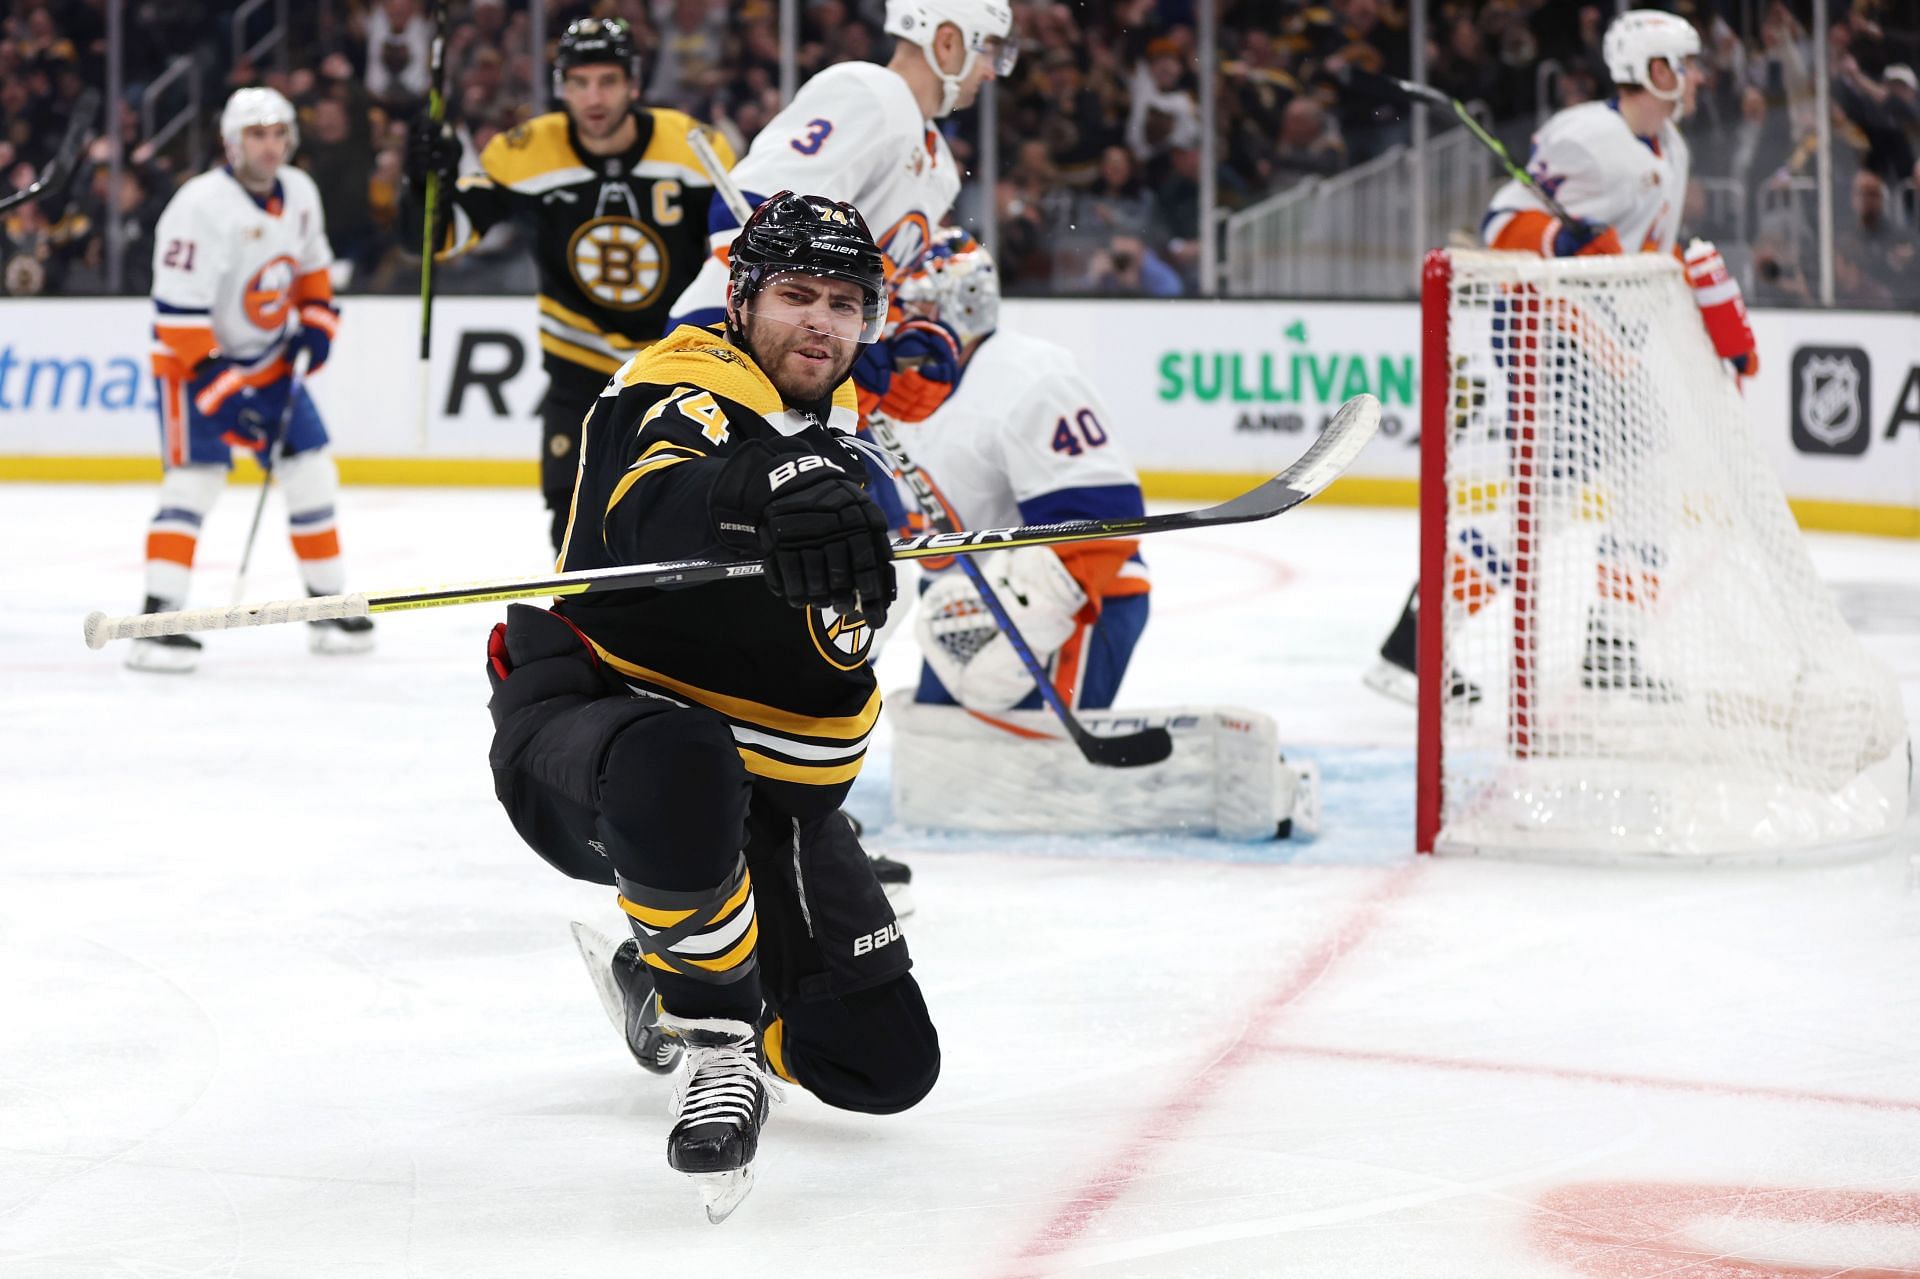 Boston Bruins: Jake DeBrusk's Journey to the NHL Continues